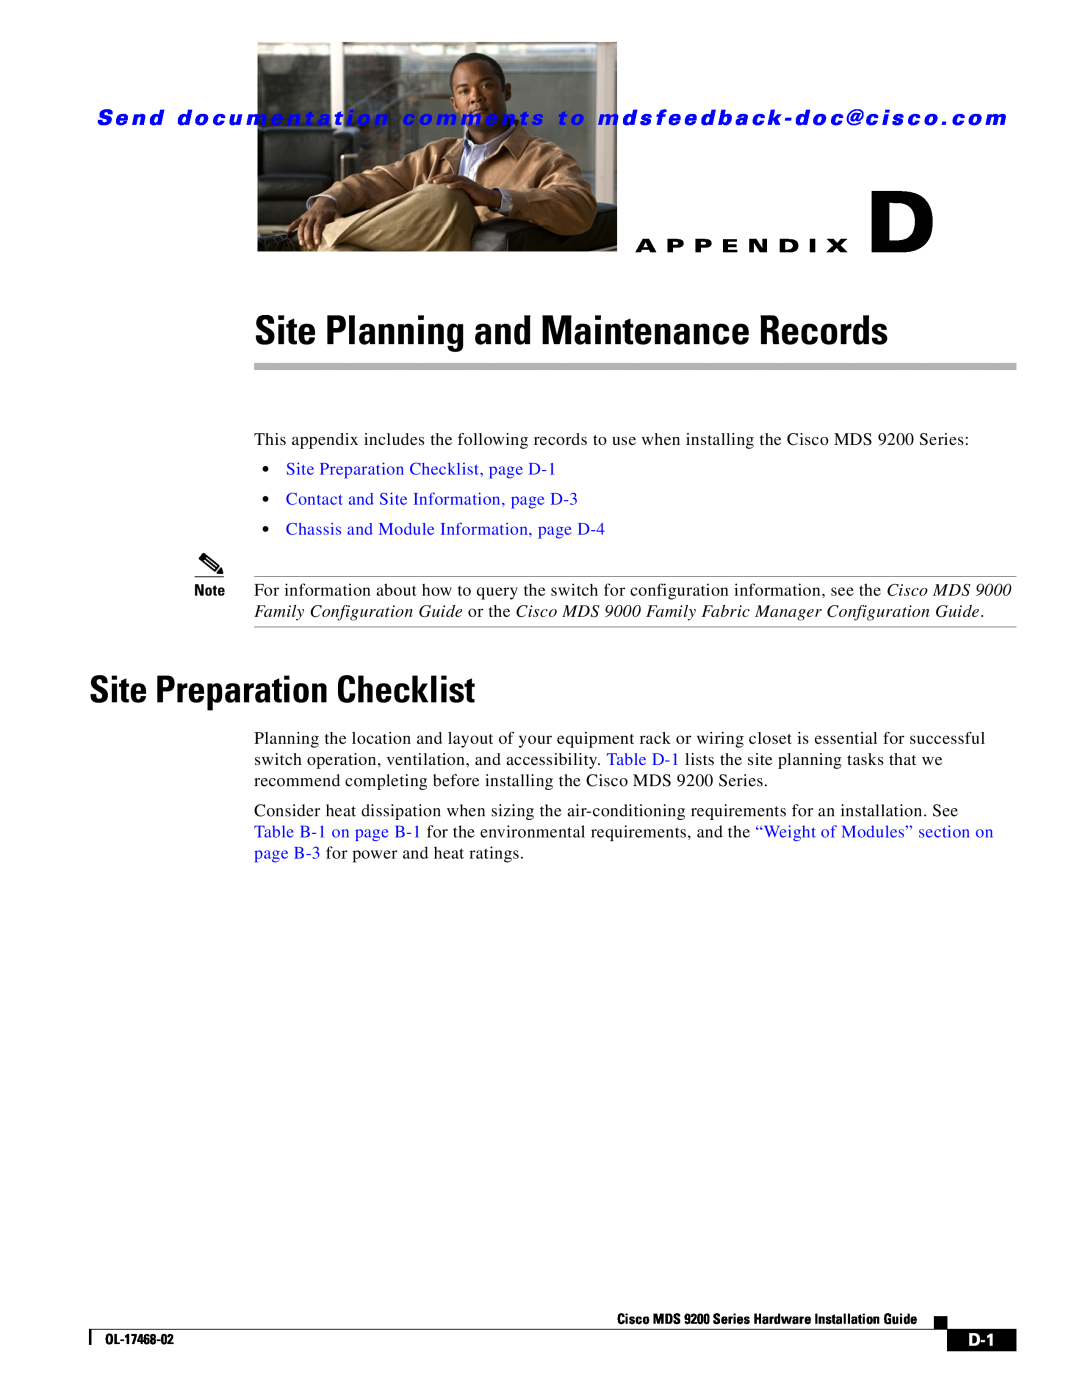 Cisco Systems MDS 9200 Series manual Site Planning and Maintenance Records, Site Preparation Checklist, A P P E N D I X D 